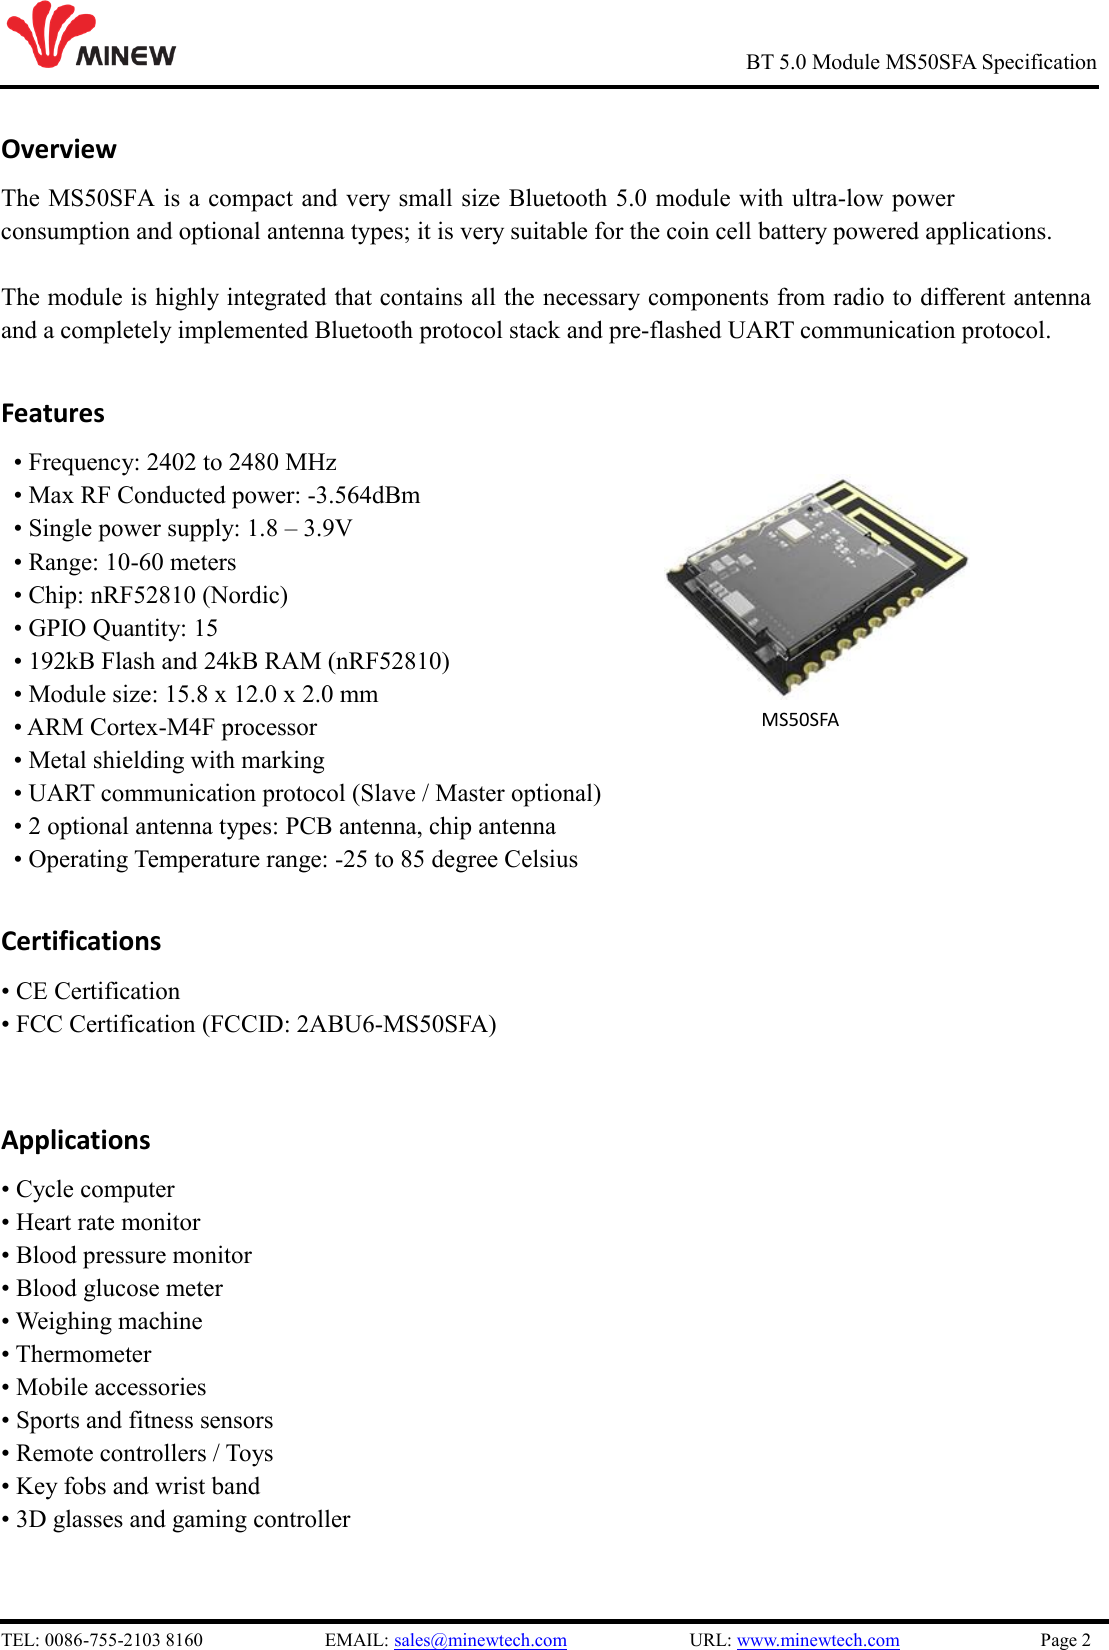 TEL: 0086-755-2103 8160  EMAIL: sales@minewtech.com  URL: www.minewtech.com  Page 2 BT 5.0 Module MS50SFA Specification Overview The MS50SFA is a compact and very small size Bluetooth 5.0 module with ultra-low power consumption and optional antenna types; it is very suitable for the coin cell battery powered applications.  The module is highly integrated that contains all the necessary components from radio to different antenna and a completely implemented Bluetooth protocol stack and pre-flashed UART communication protocol.   Features • Frequency: 2402 to 2480 MHz• Max RF Conducted power: -3.564dBm• Single power supply: 1.8 – 3.9V• Range: 10-60 meters• Chip: nRF52810 (Nordic)• GPIO Quantity: 15• 192kB Flash and 24kB RAM (nRF52810)• Module size: 15.8 x 12.0 x 2.0 mm• ARM Cortex-M4F processor• Metal shielding with marking• UART communication protocol (Slave / Master optional)• 2 optional antenna types: PCB antenna, chip antenna• Operating Temperature range: -25 to 85 degree CelsiusCertifications• CE Certification• FCC Certification (FCCID: 2ABU6-MS50SFA)Applications• Cycle computer• Heart rate monitor• Blood pressure monitor• Blood glucose meter• Weighing machine• Thermometer• Mobile accessories• Sports and fitness sensors• Remote controllers / Toys• Key fobs and wrist band• 3D glasses and gaming controller  MS50SFA 